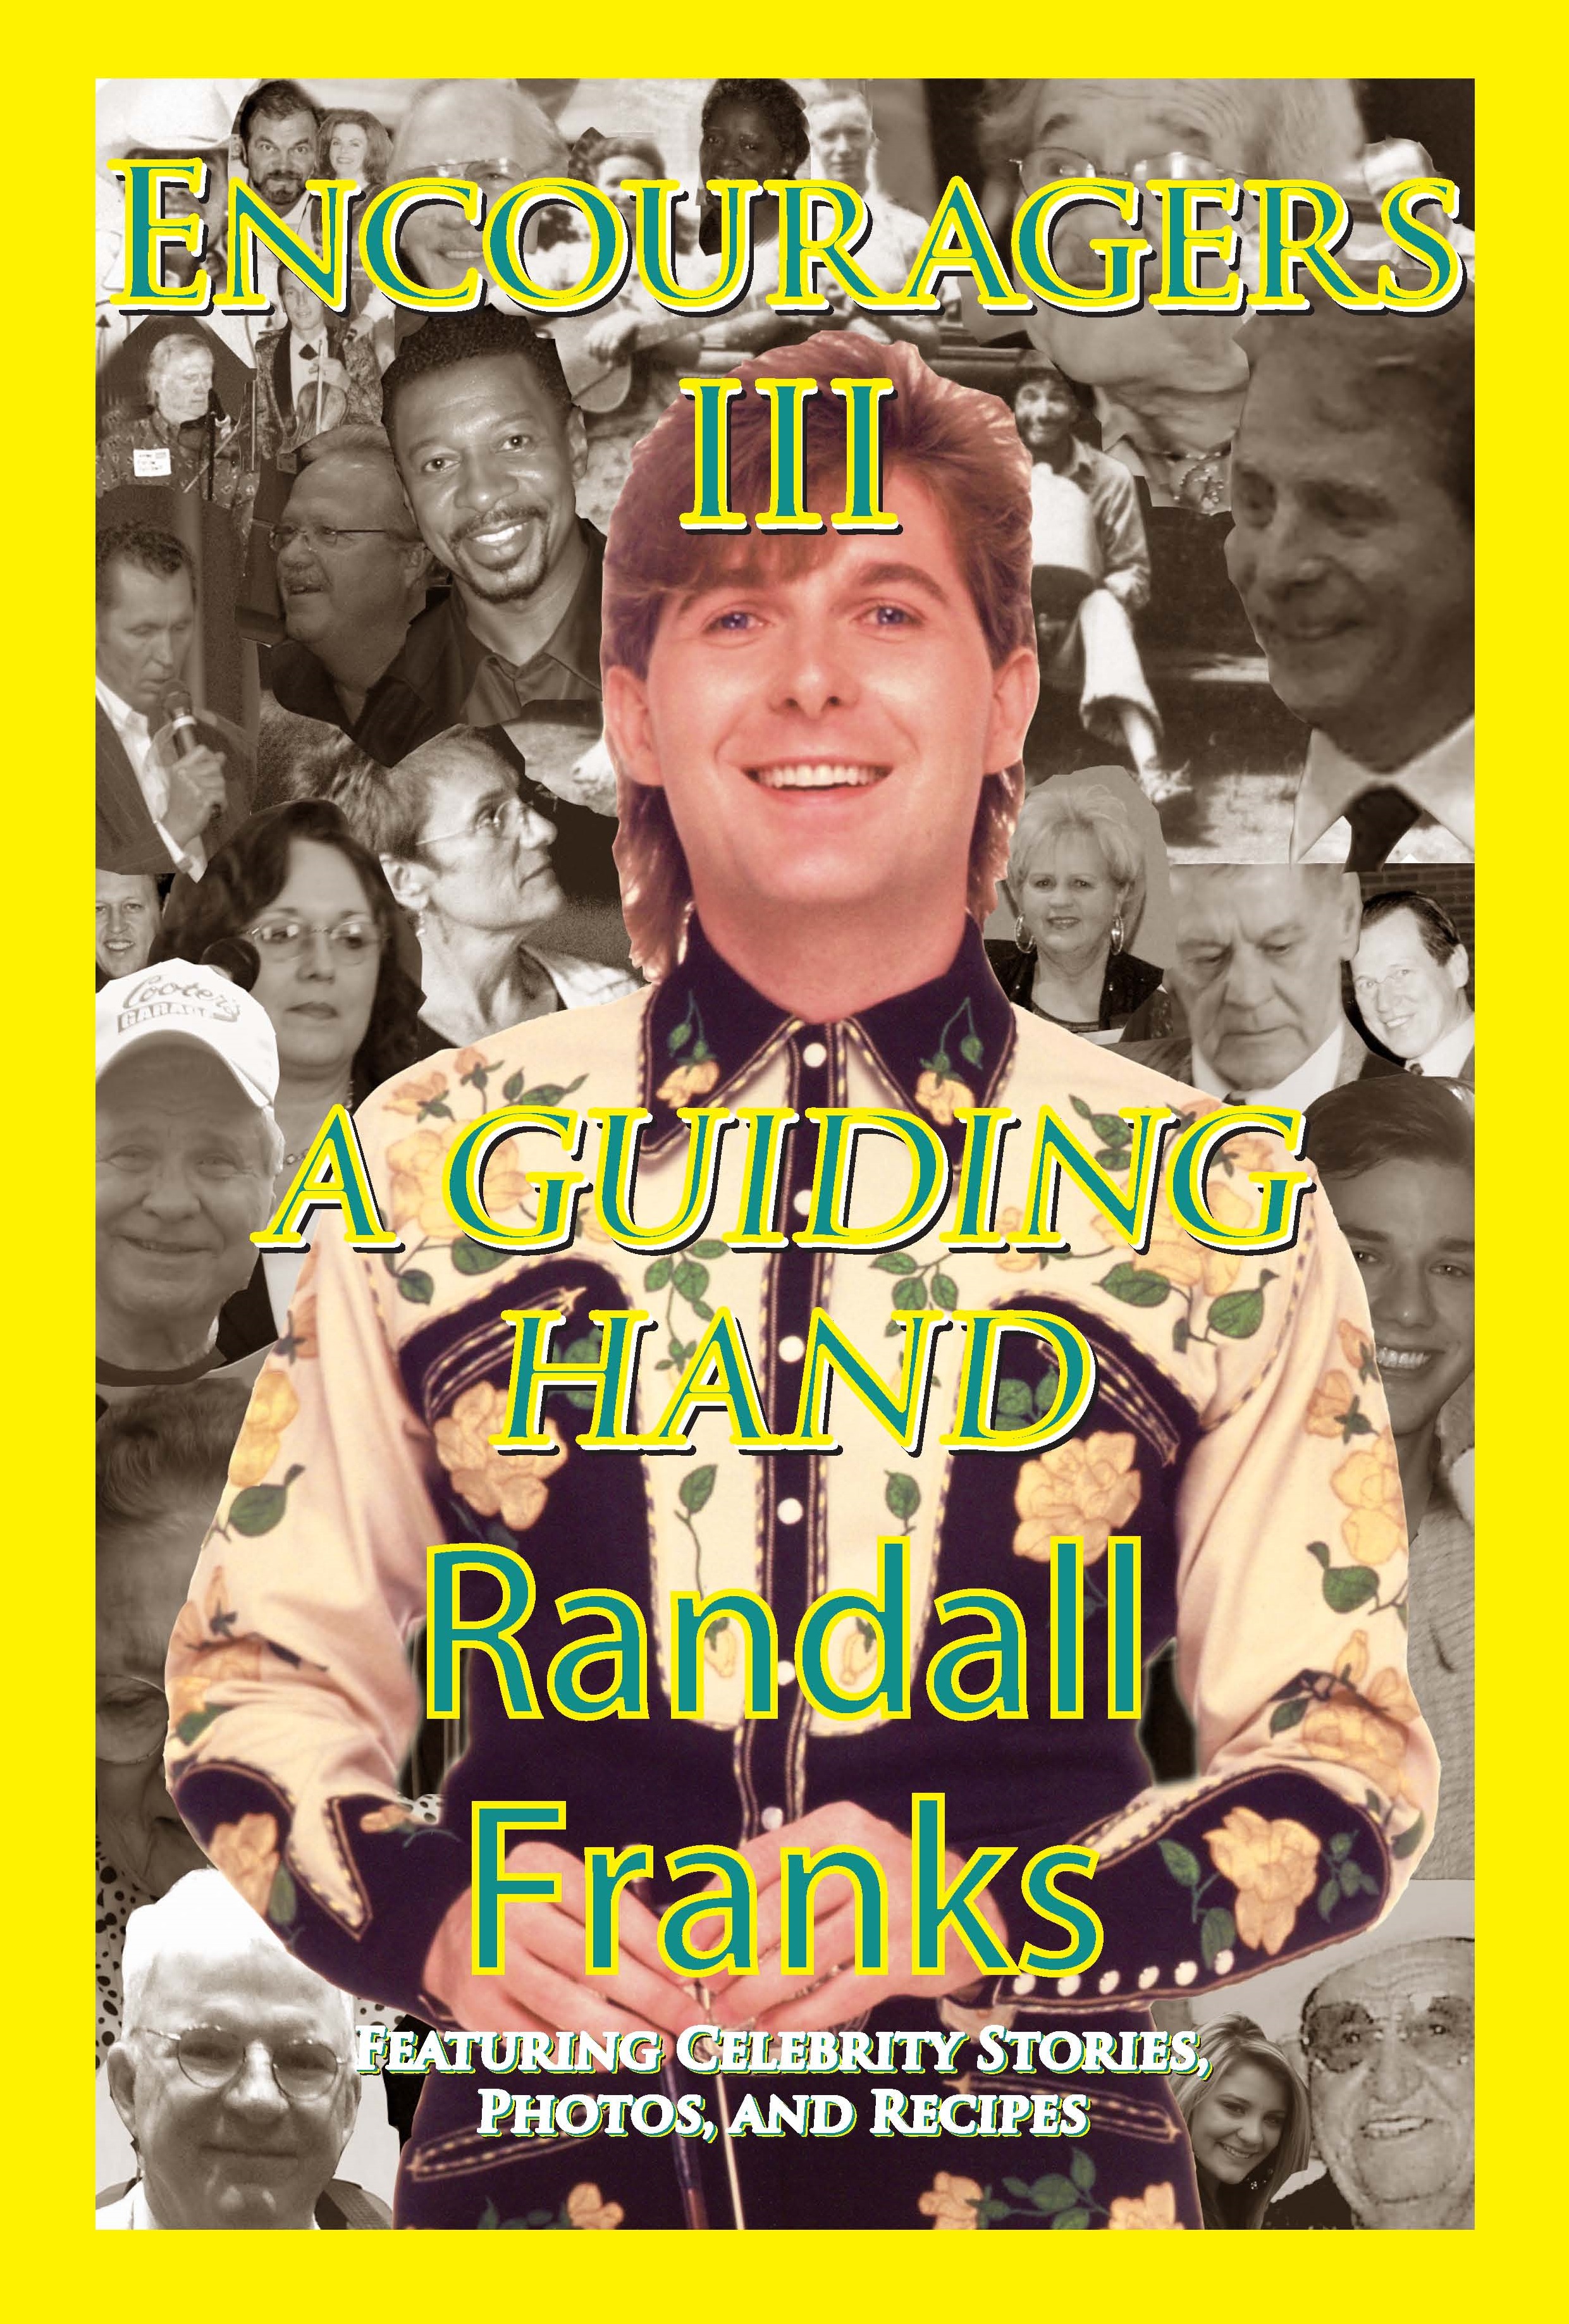 "Encouragers III: A Guiding Hand" shares encouraging stories of fellow celebrities by Randall Franks.